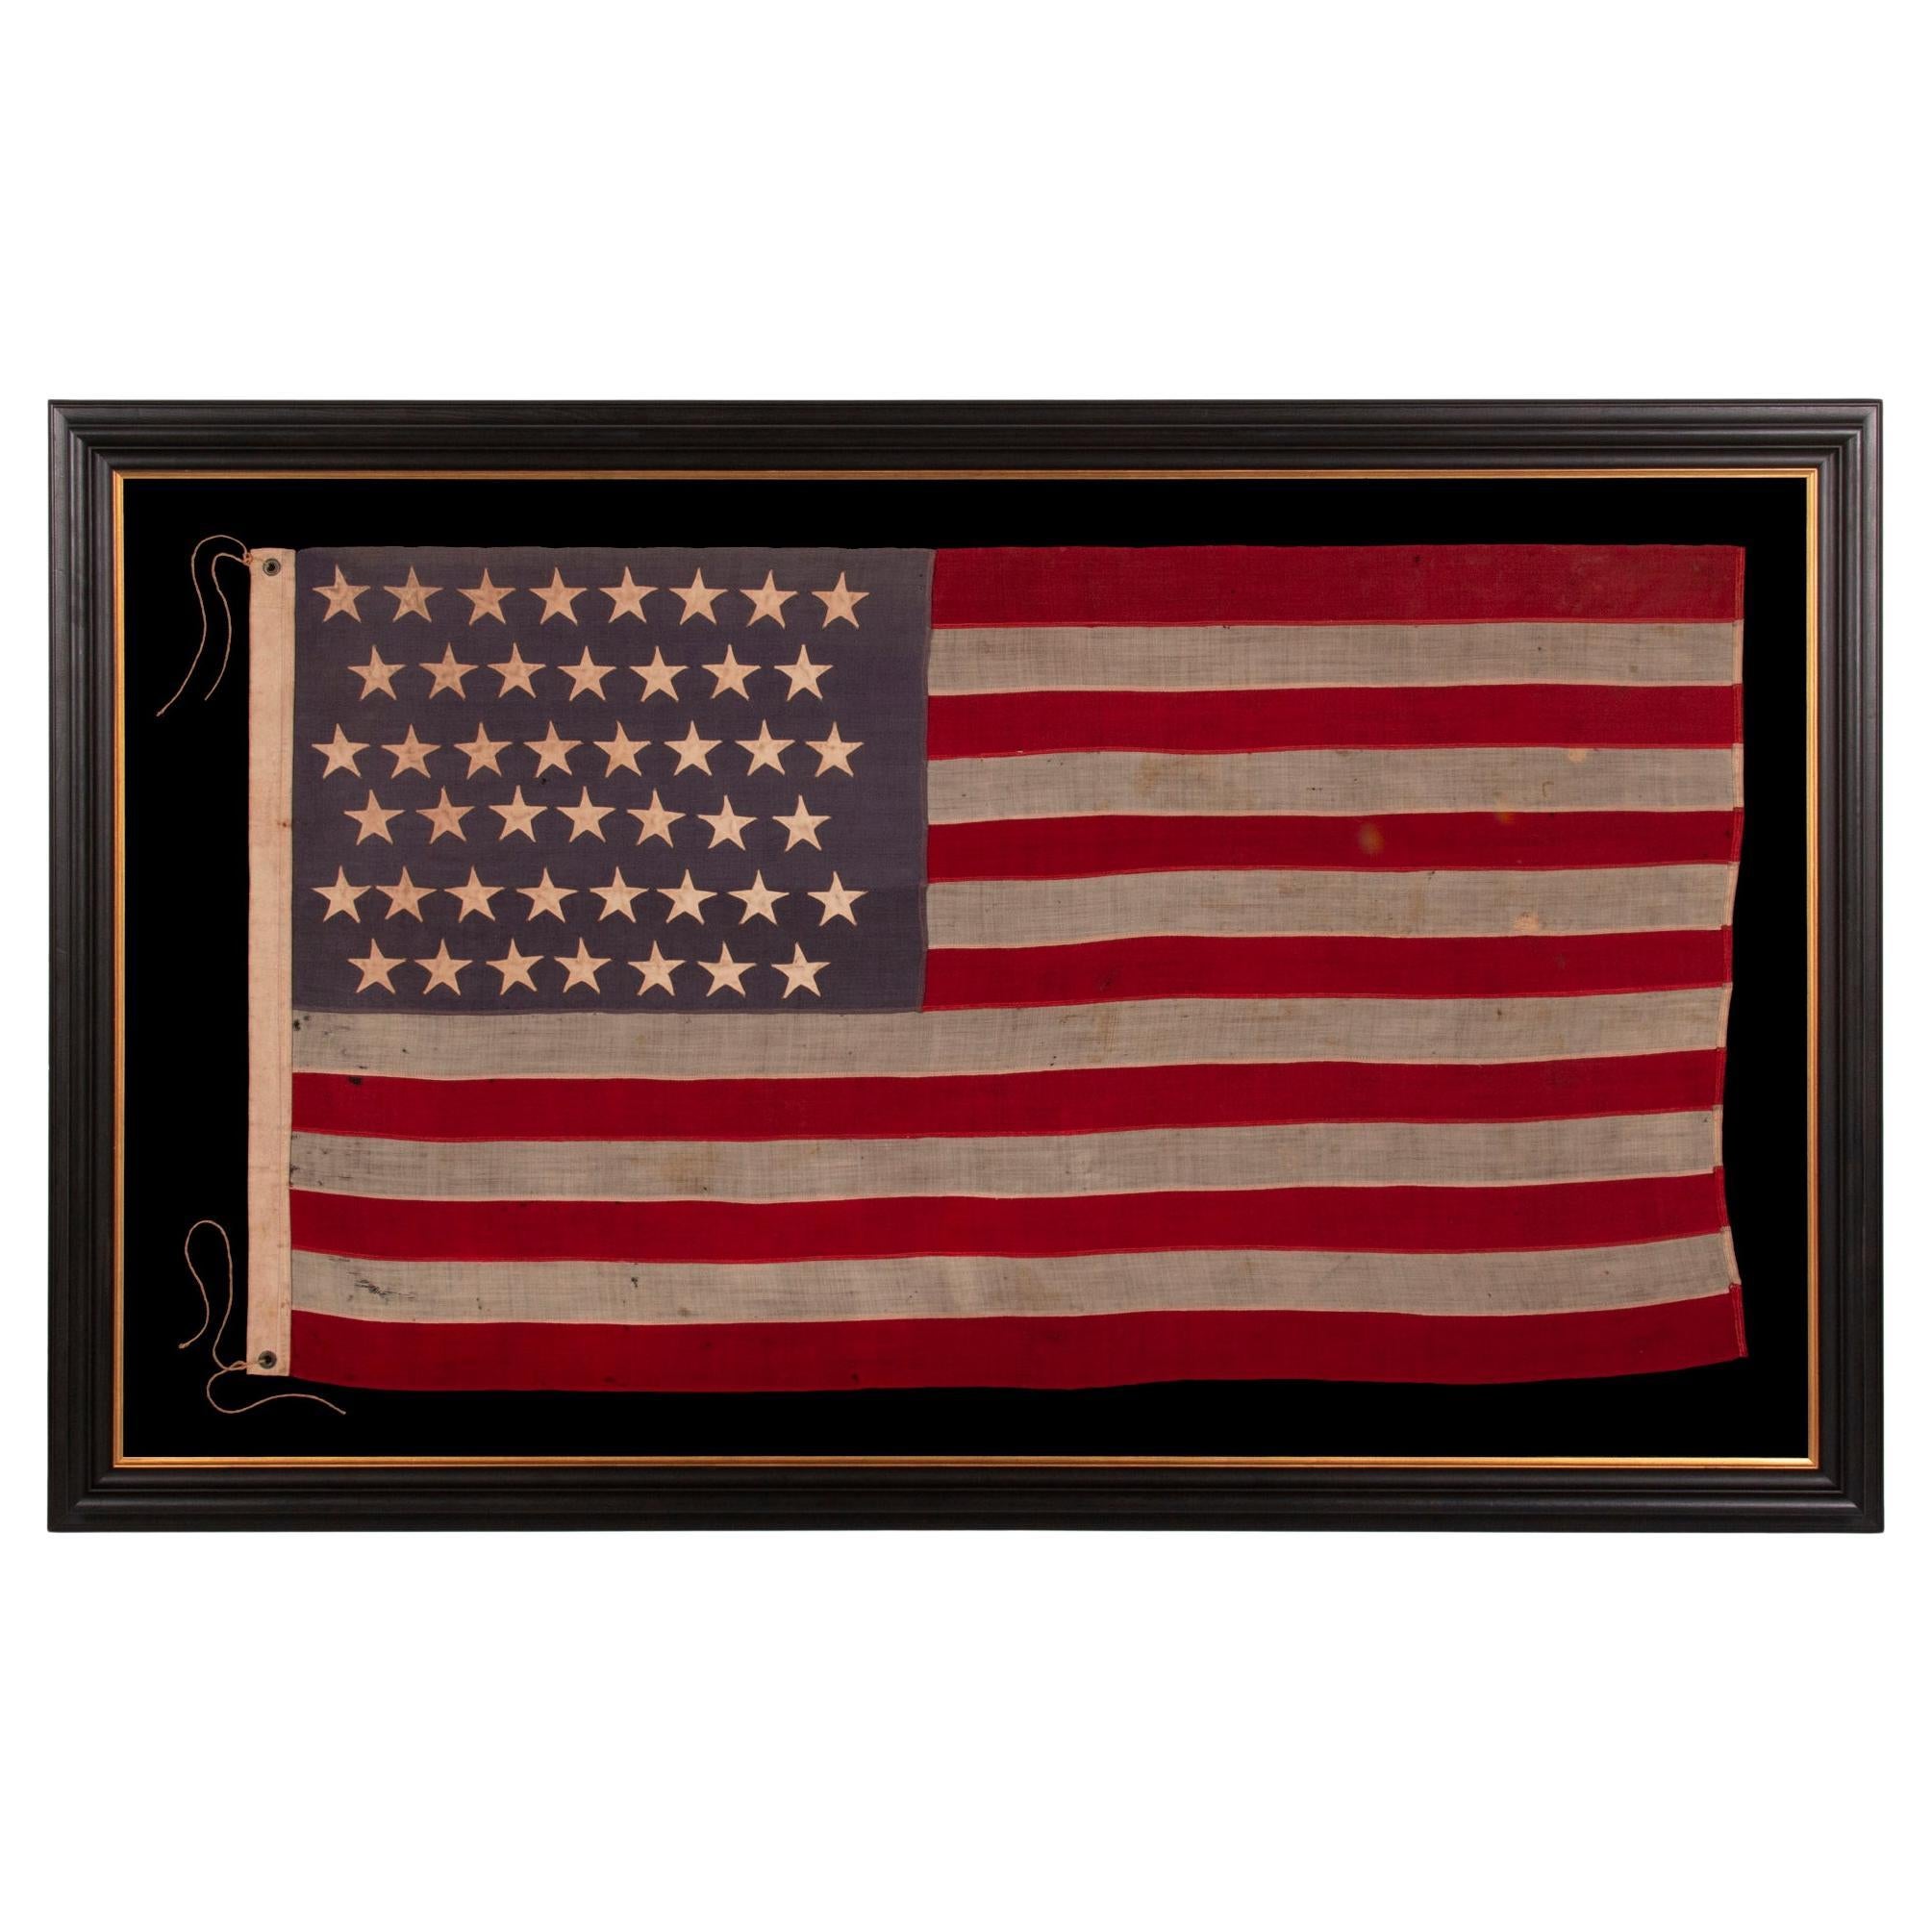 45 Star Antique American Flag, with Staggered Rows, Utah Statehood, ca 1890-1896